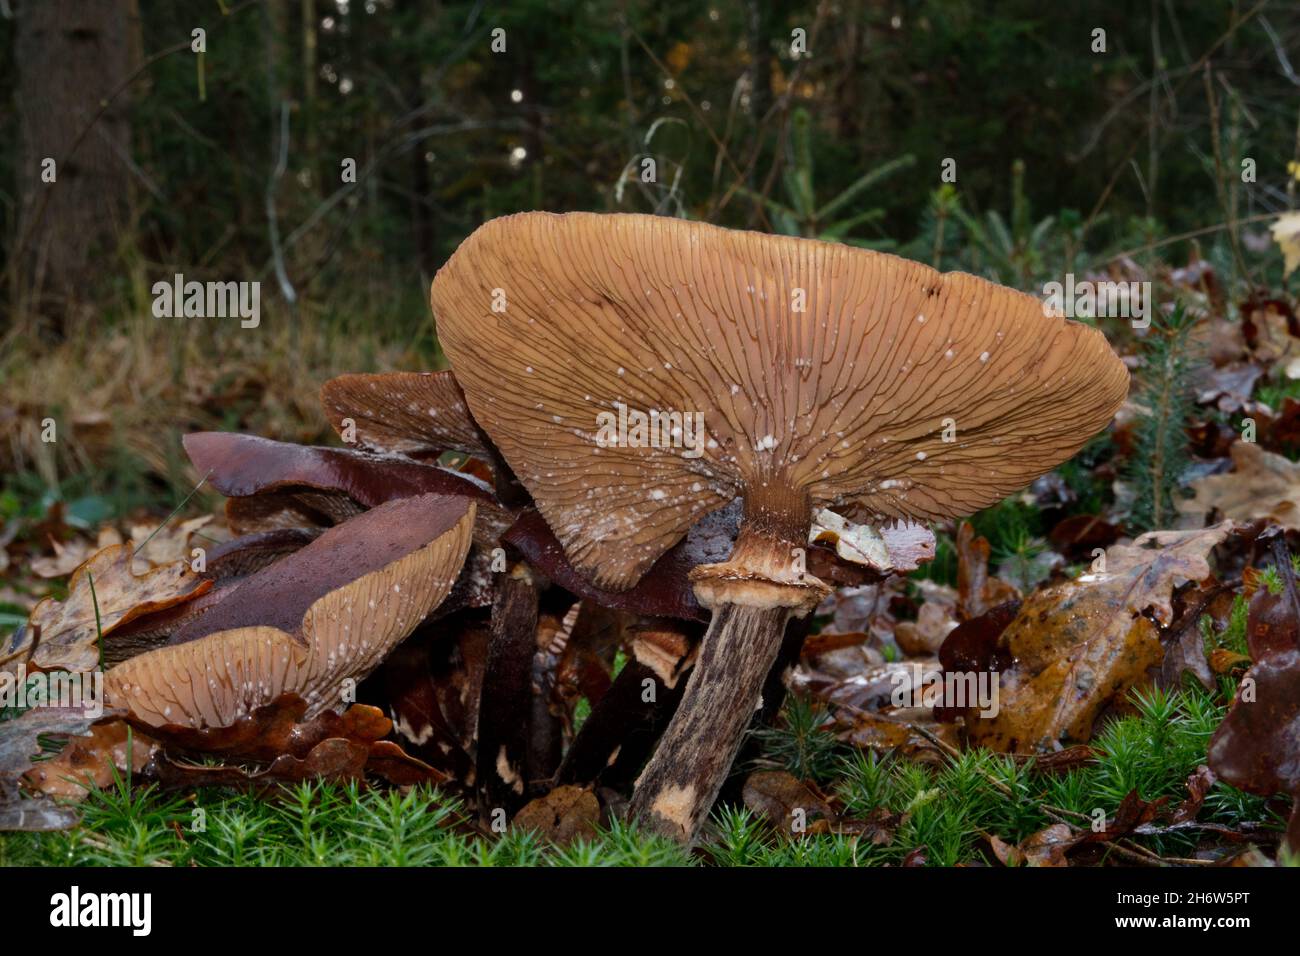 Honey mushroom in moss between fallen leaves; view on the slats in the cap Stock Photo